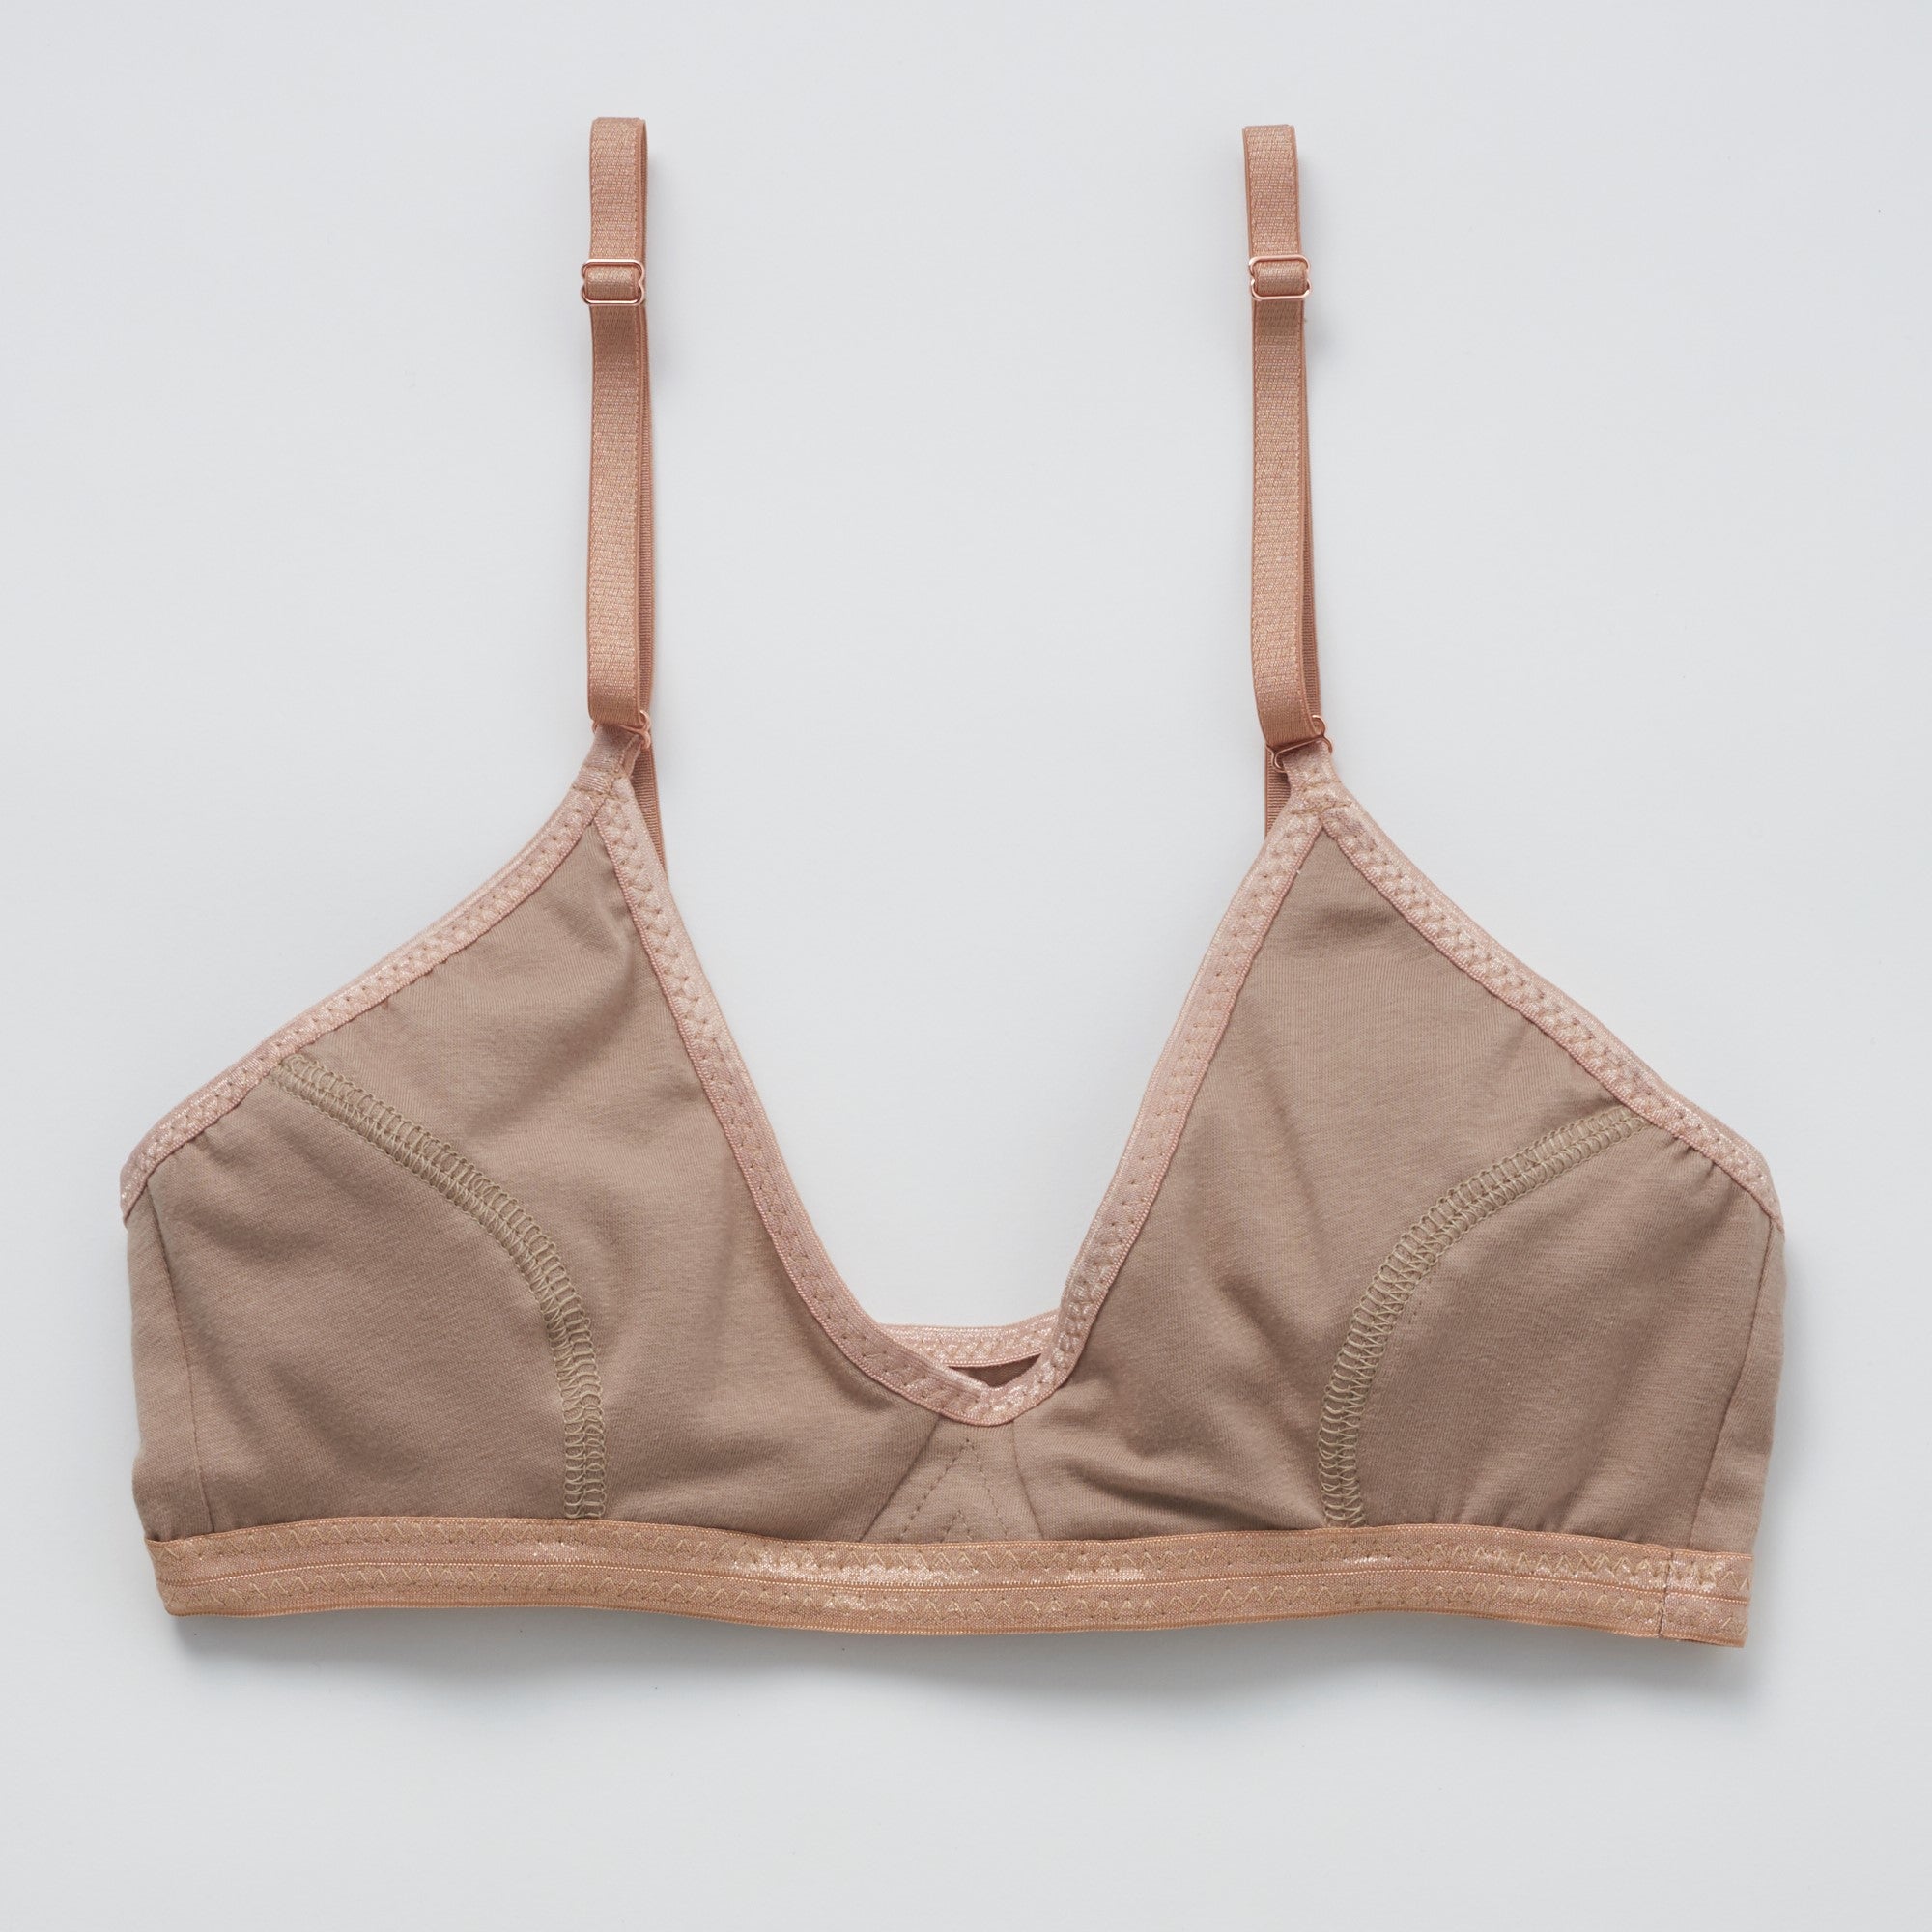 How to Choose an Organic Cotton Bra from Brook There